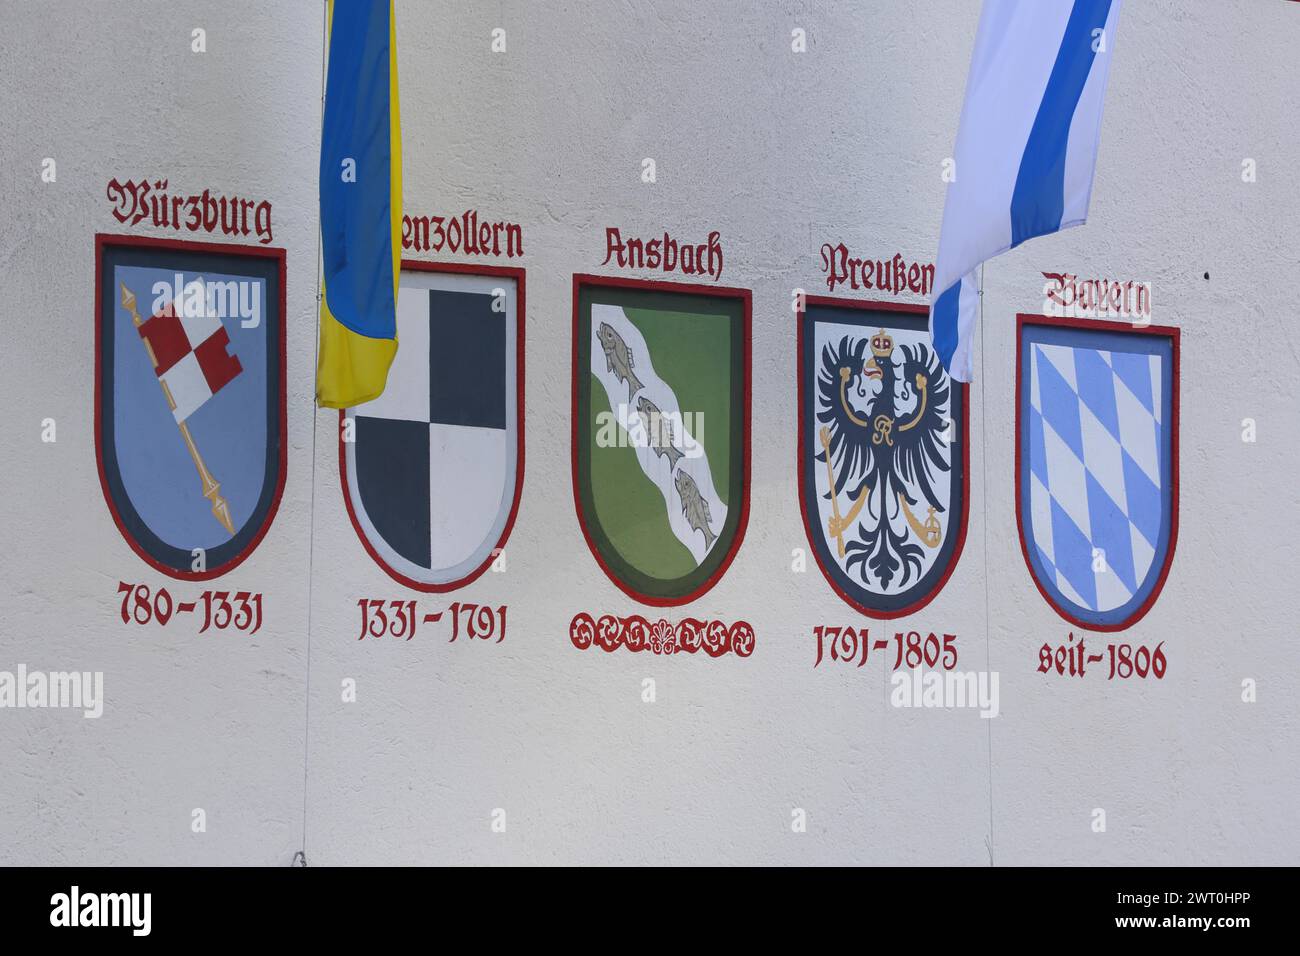 Coat of arms for the city history, city chronicle with Wuerzburg, Hohenzollern, city coat of arms, Prussia, Bavaria, inscription, flags, town hall Stock Photo